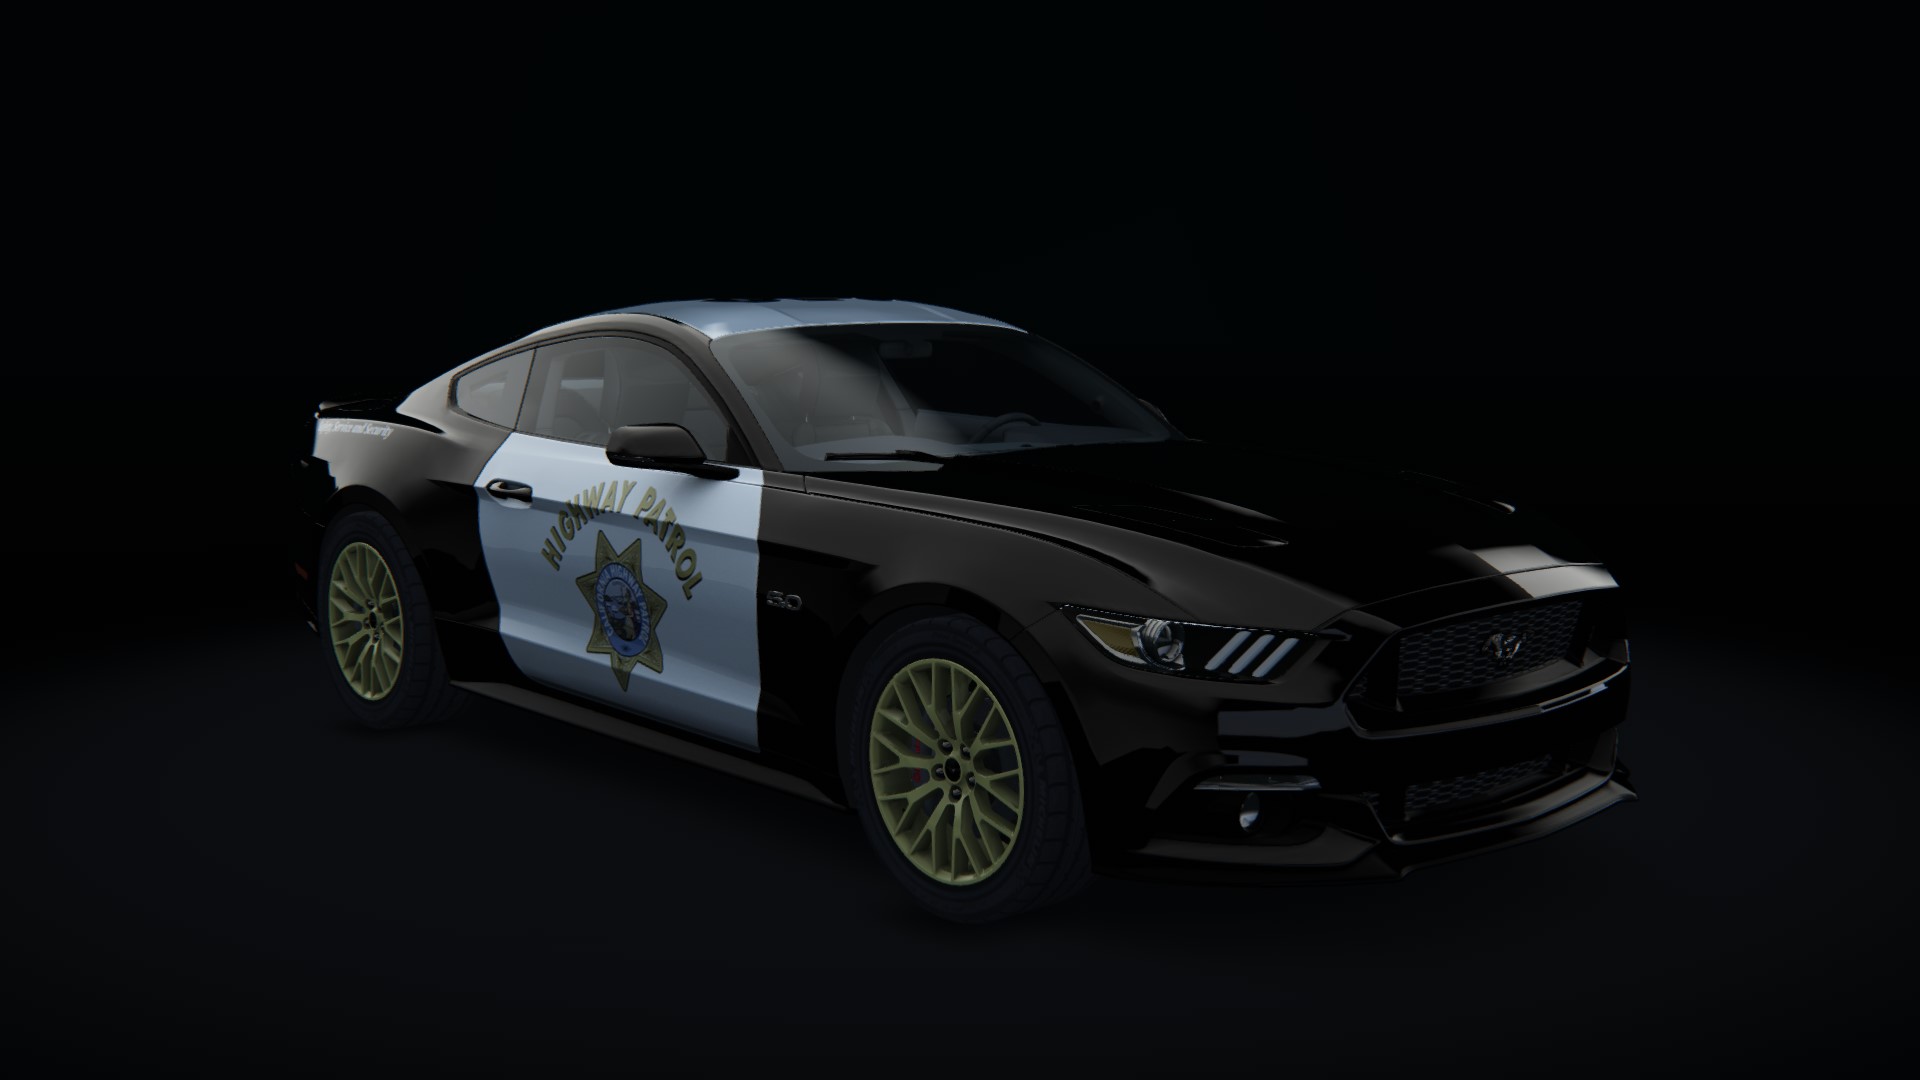 Ford Mustang 2015, skin chp_unit_146